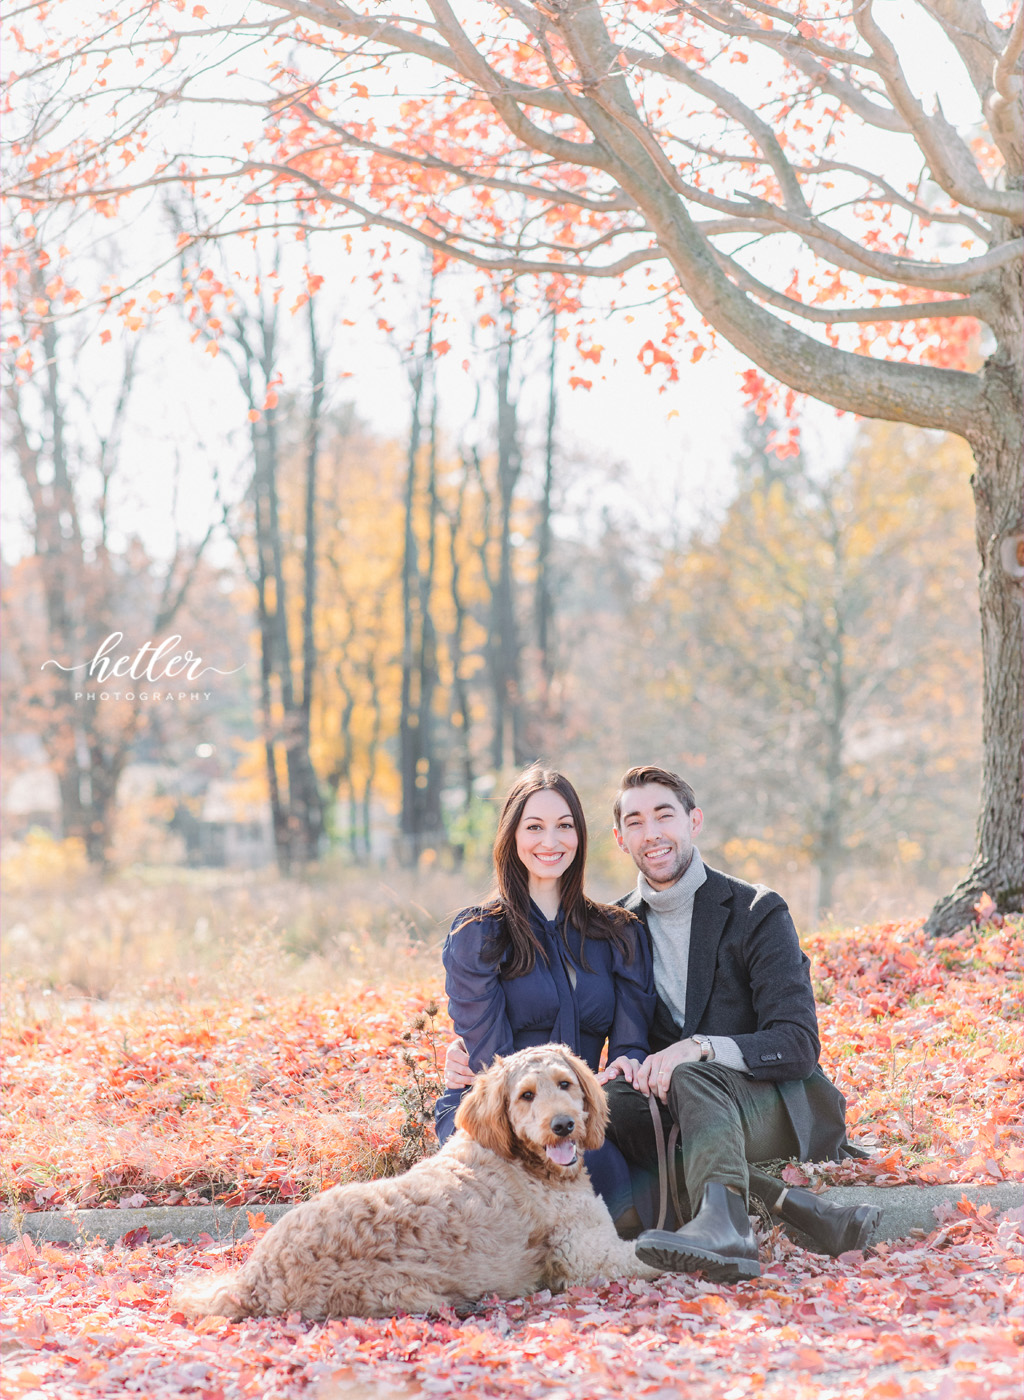 Couple photo session at The Highlands in Grand Rapids on a sunny fall day with the couple's Goldendoodle